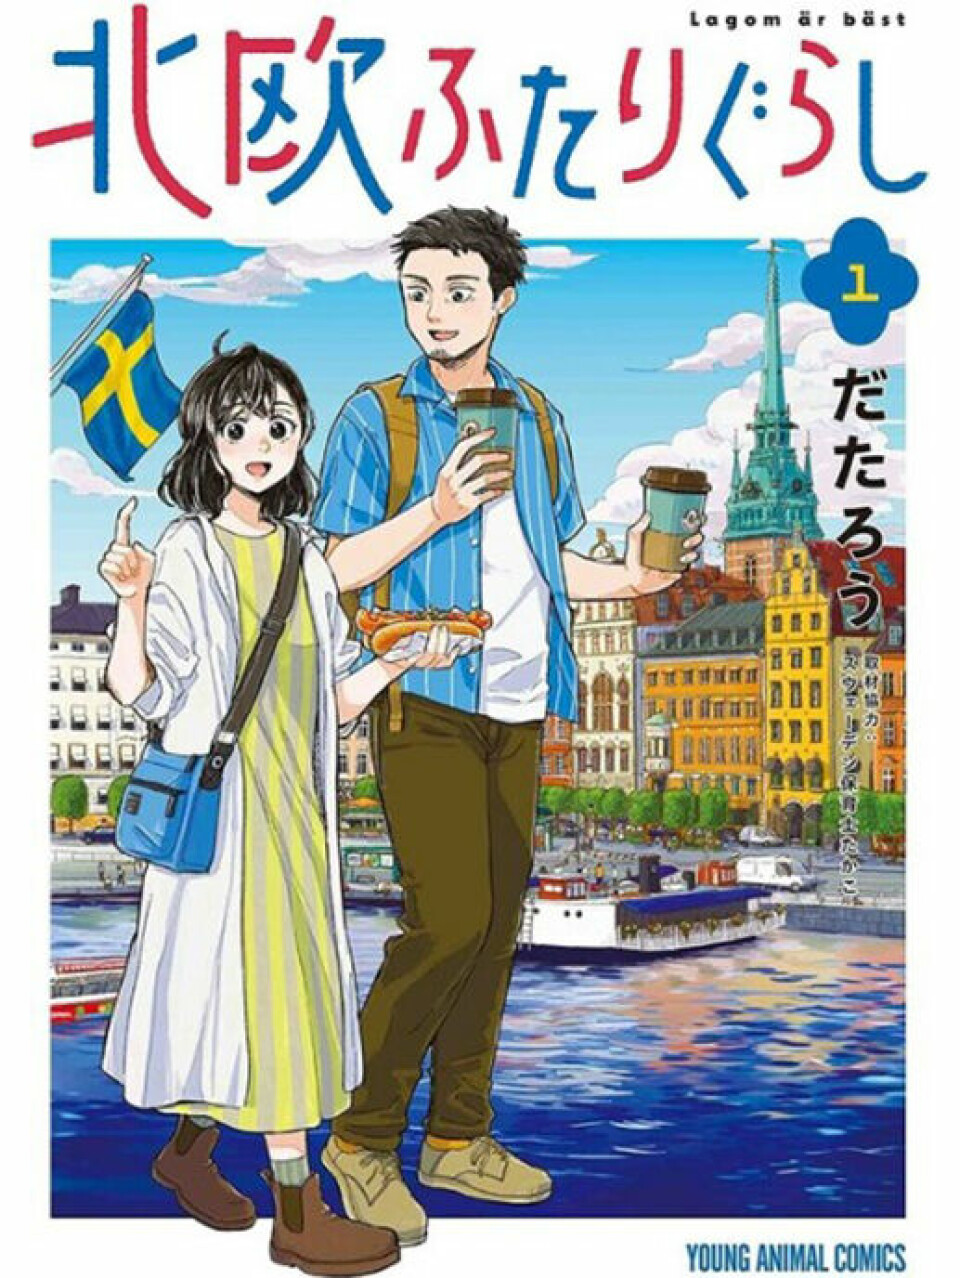 The manga Lagom är best is about a young Japanese couple who move to Stockholm.